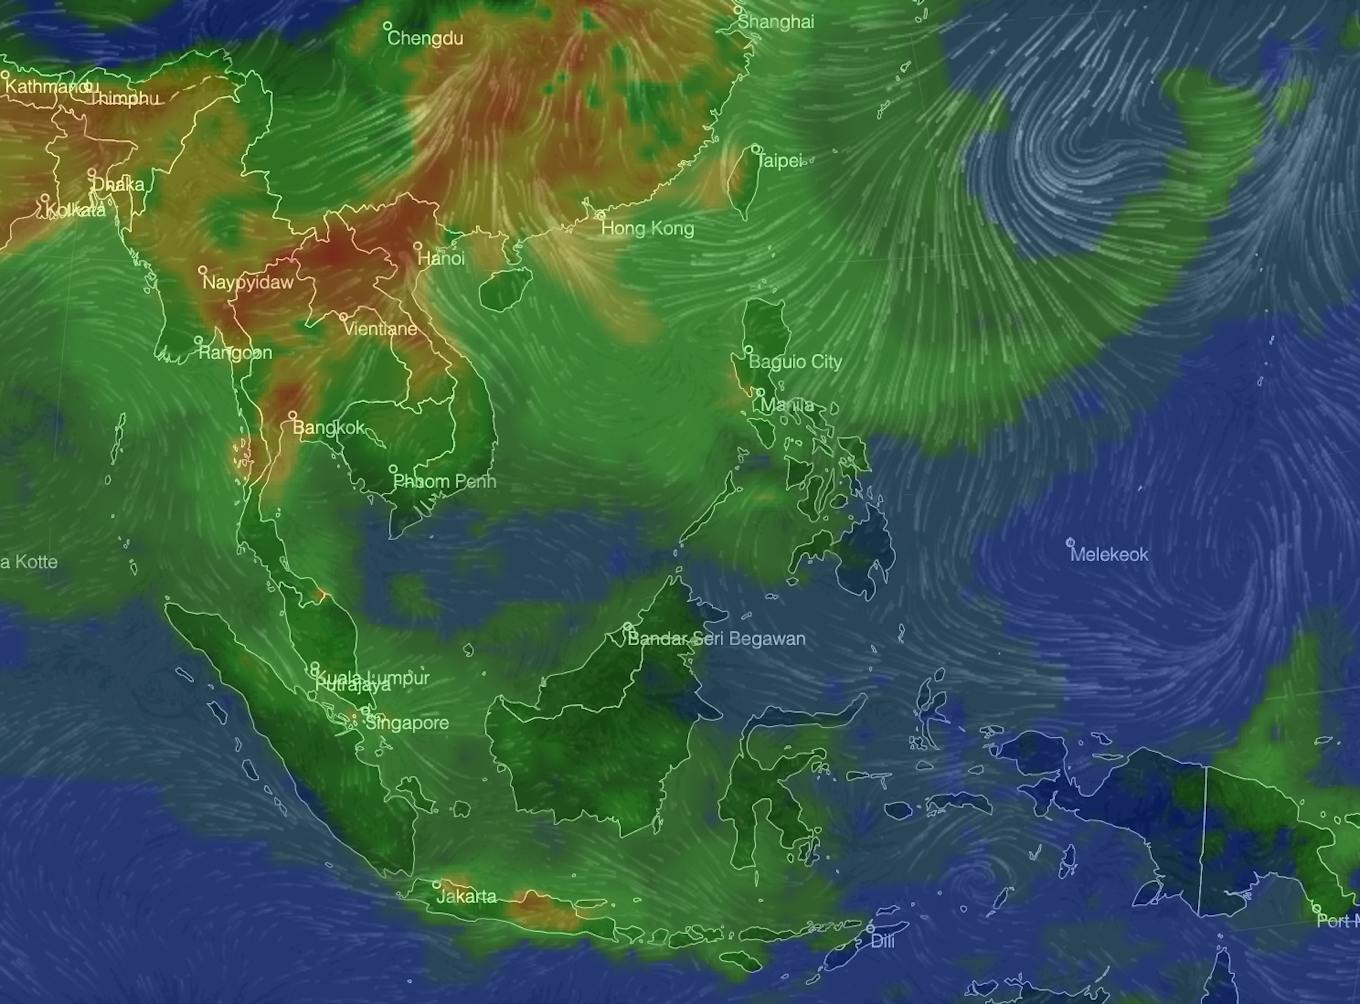 Fires burning in northern IndoChina